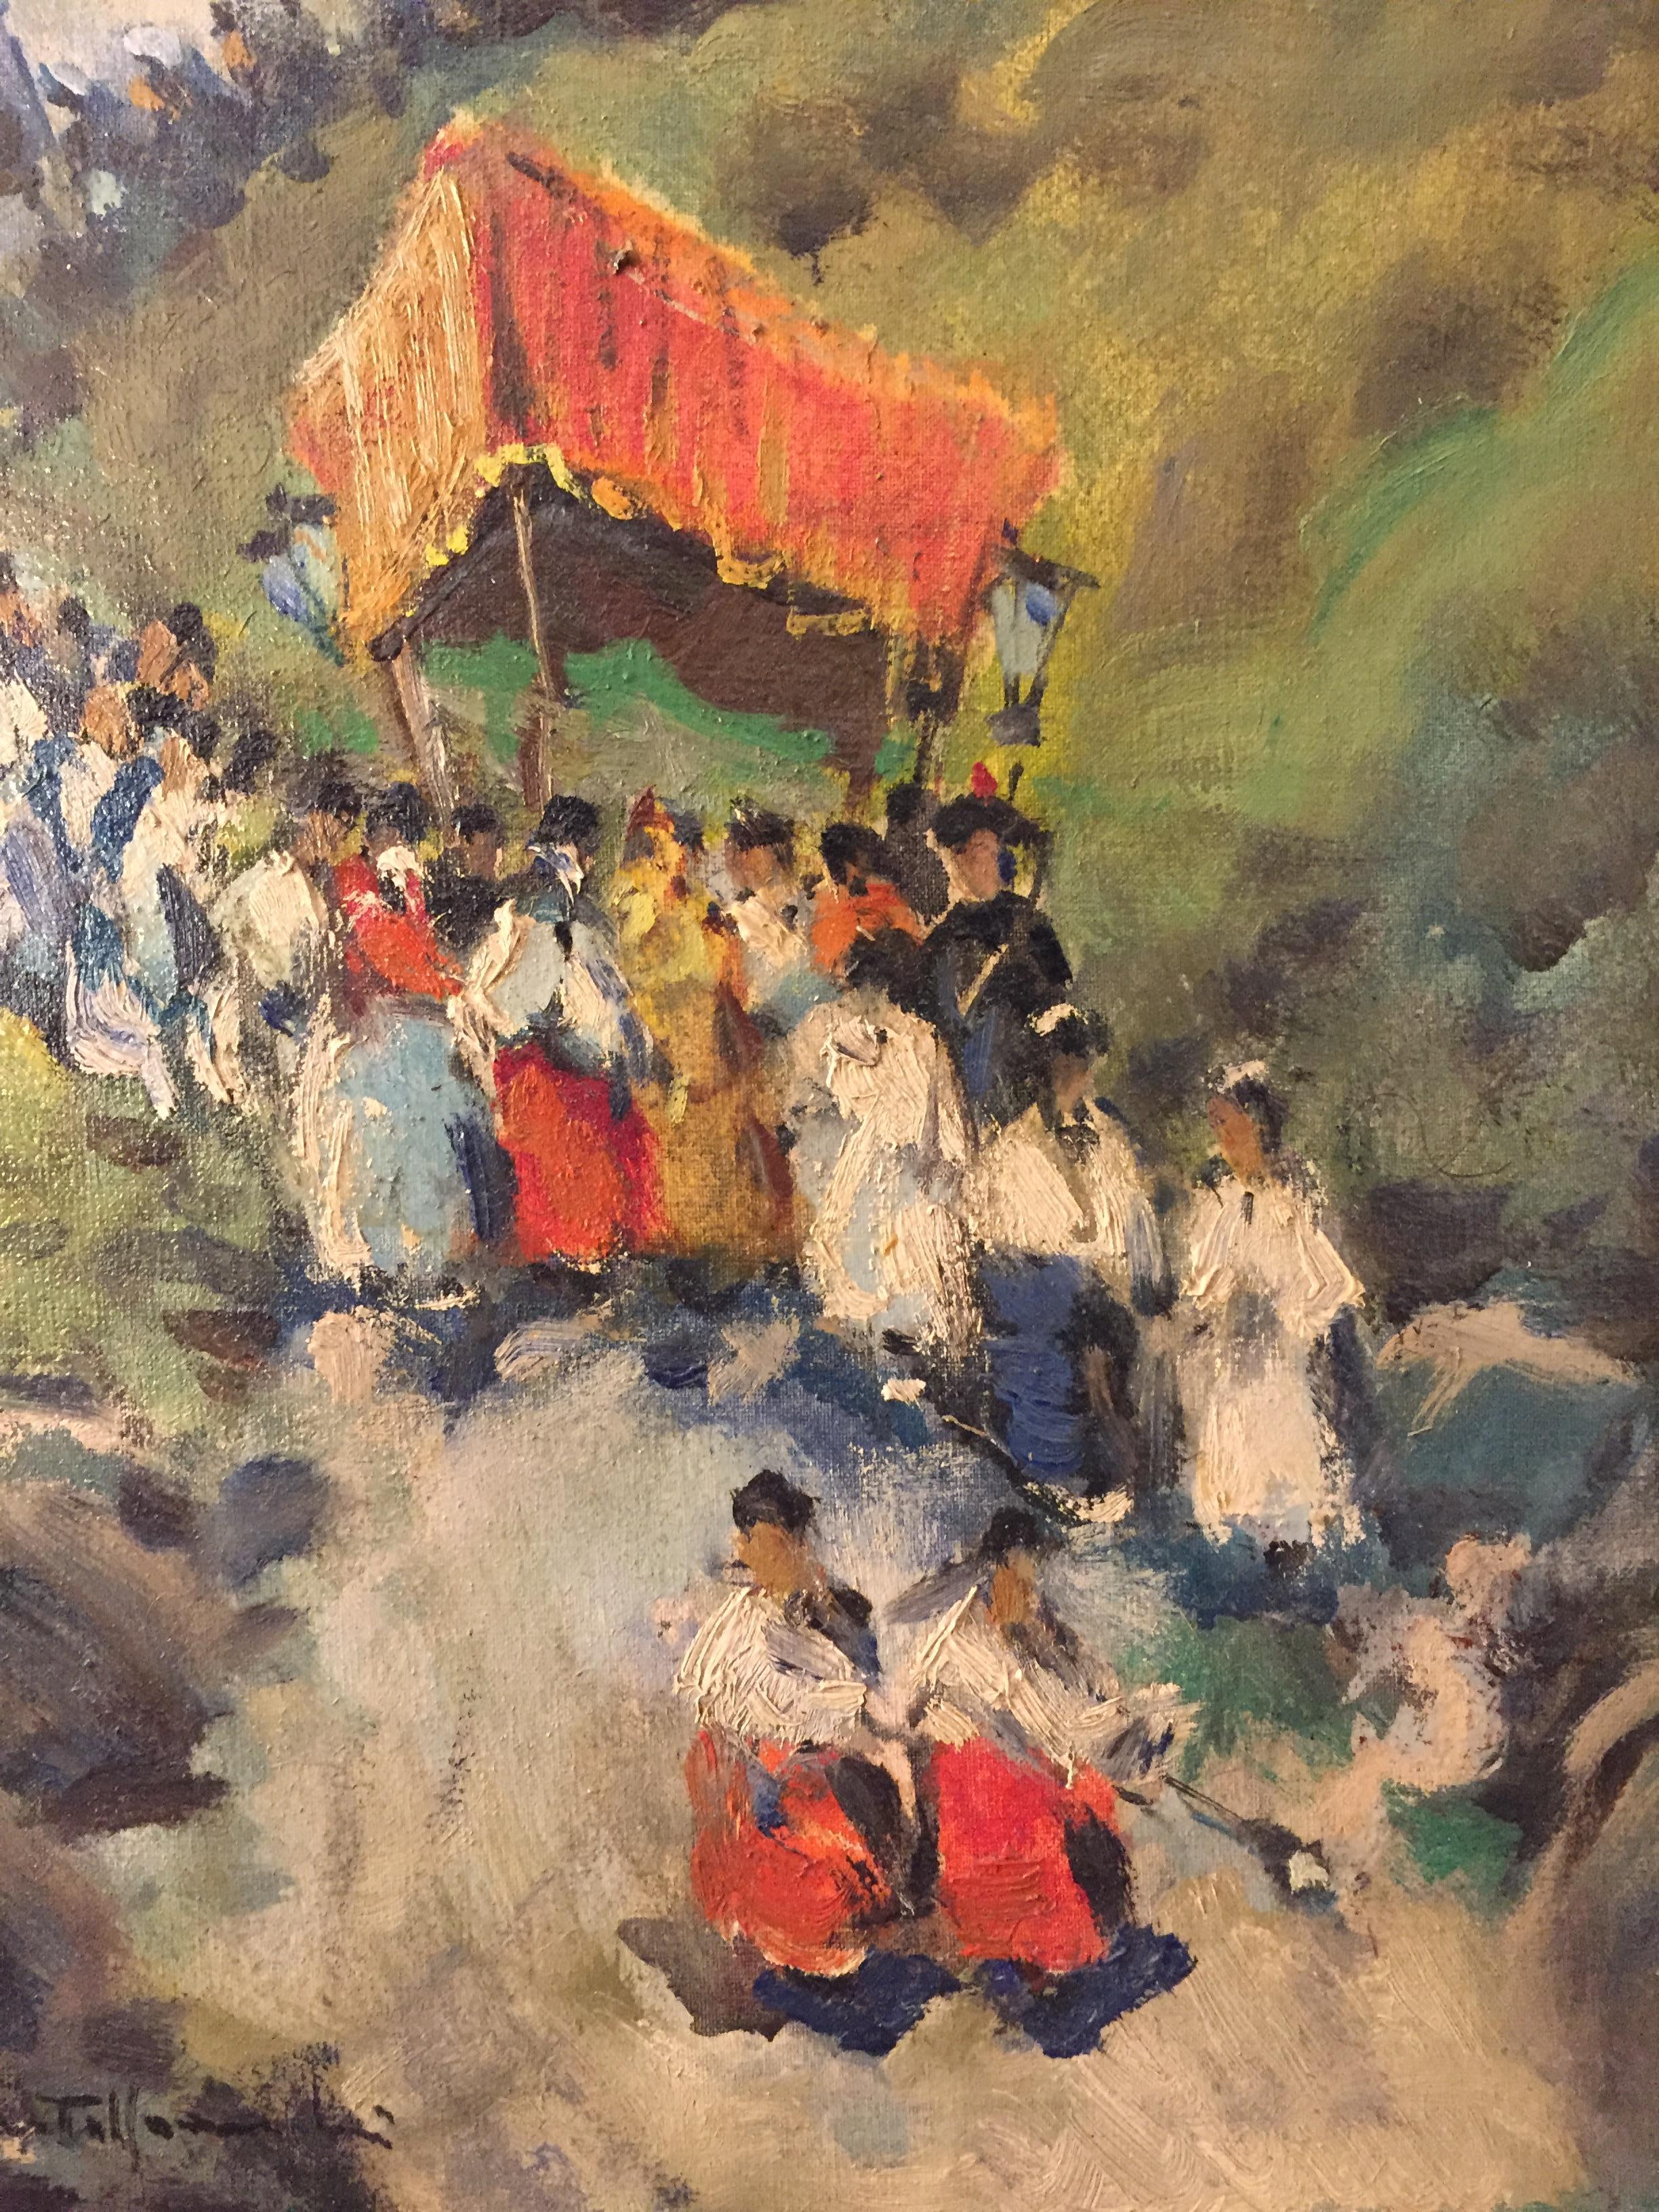 Hand-Painted 20th Century Italian Procession Along a Mountain by Castelfranchi Cirano, 1963